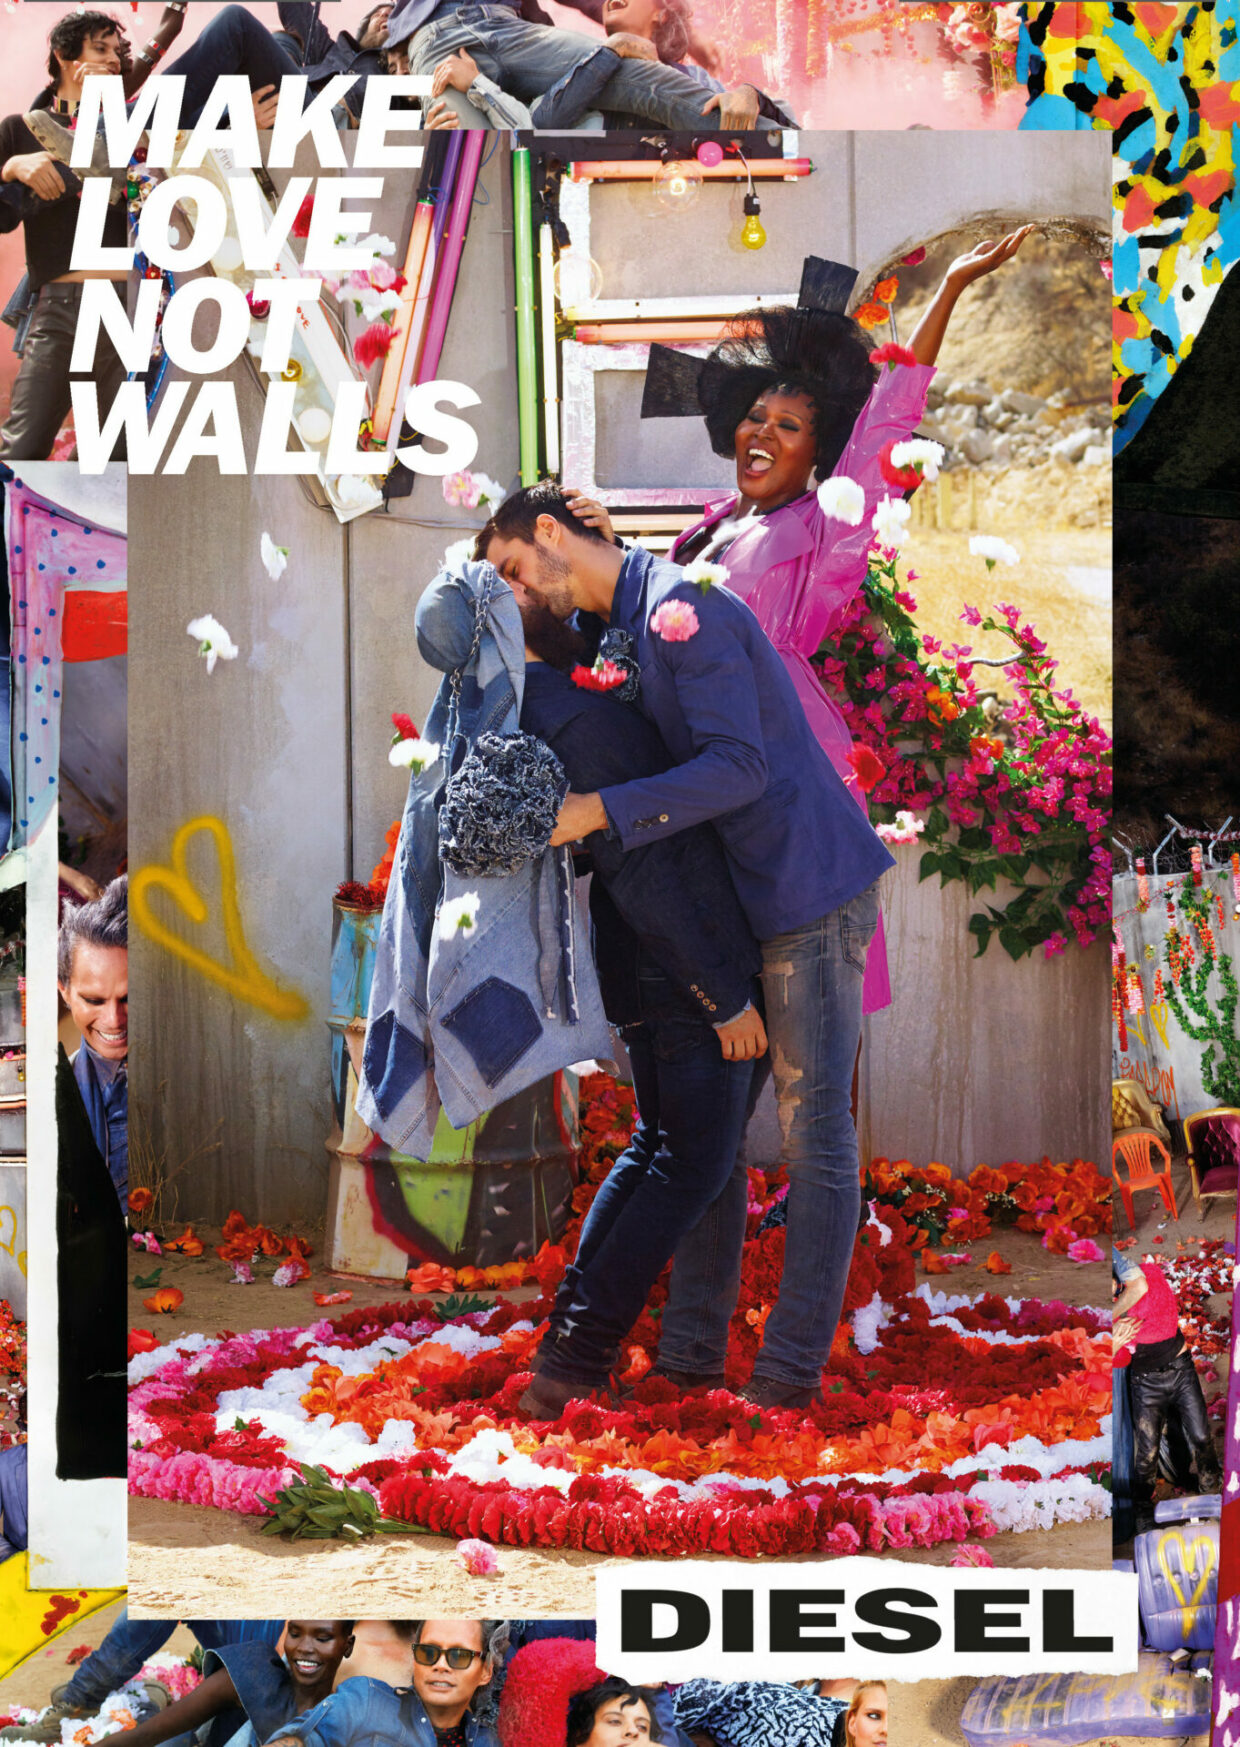 Diesel: “Make Love Not Walls” Photography and film by David LaChapelle. | 4